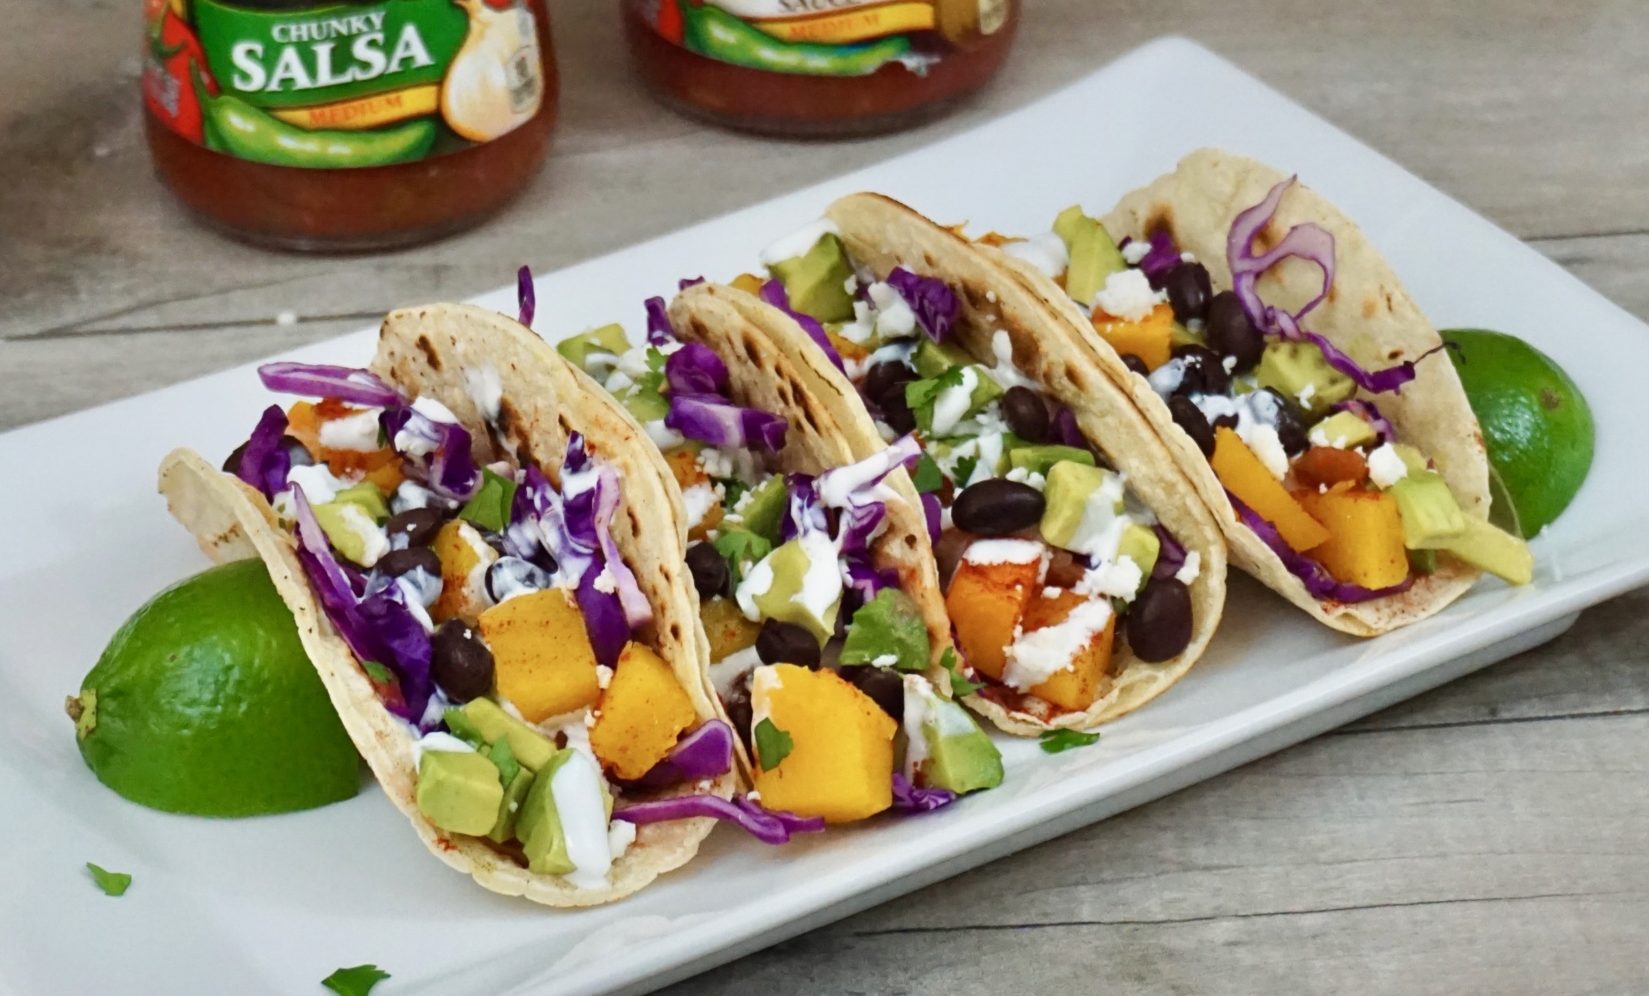 spicy roasted butternut squash tacos